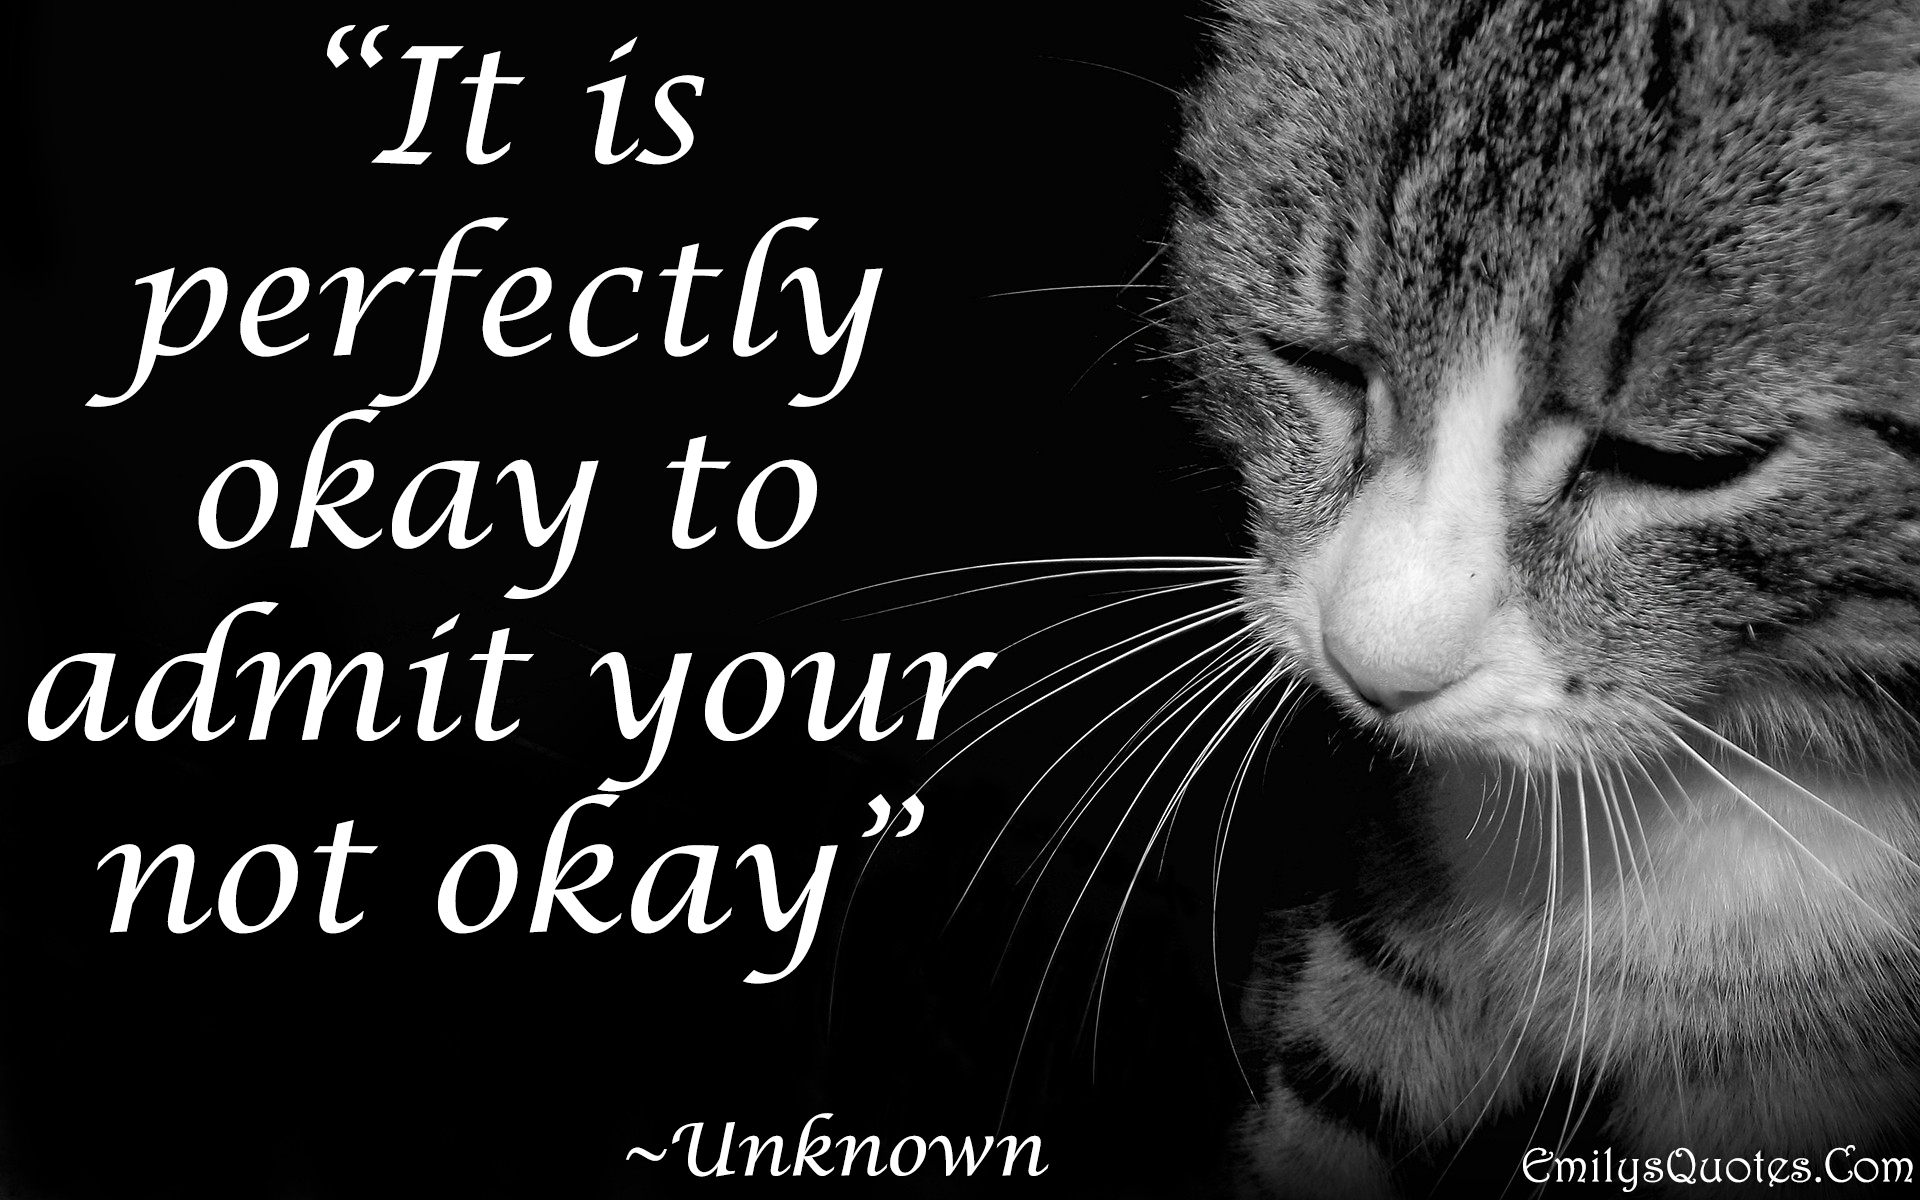 It is perfectly okay to admit that you are not okay